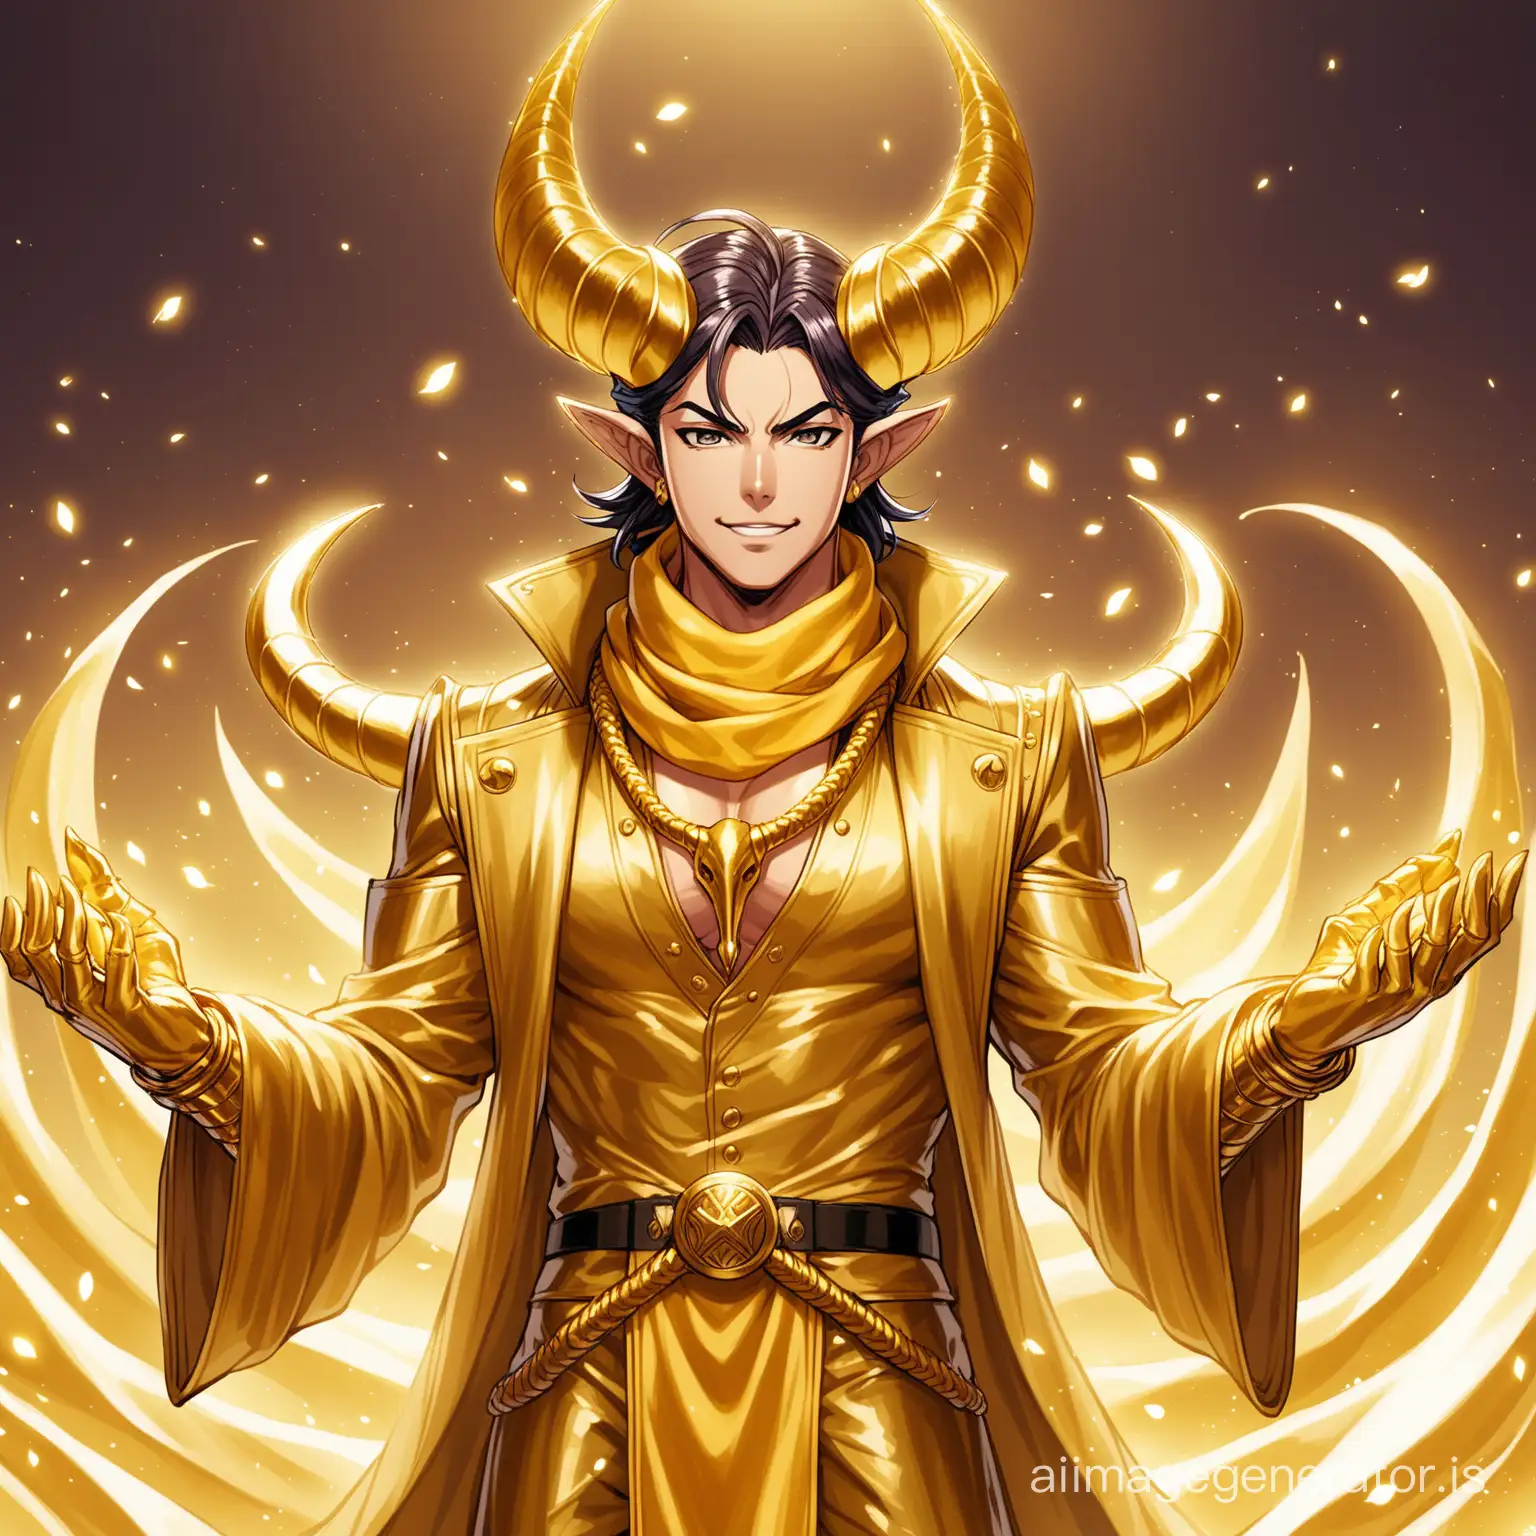 Glamorous-Tiefling-JoJo-with-Golden-Attire-and-Accessories